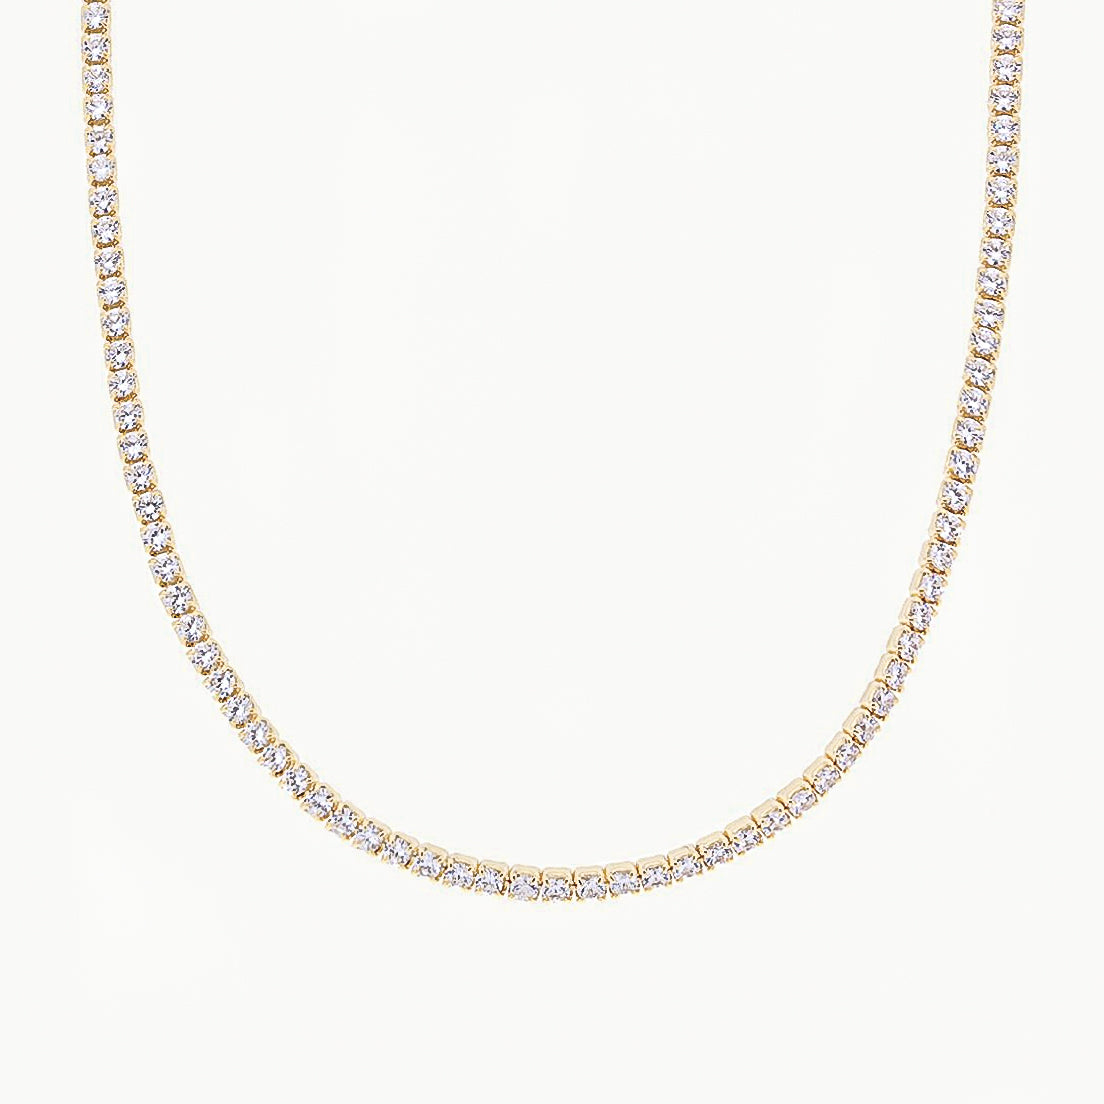 Gold Plated 925 Sterling Silver Tennis Necklace